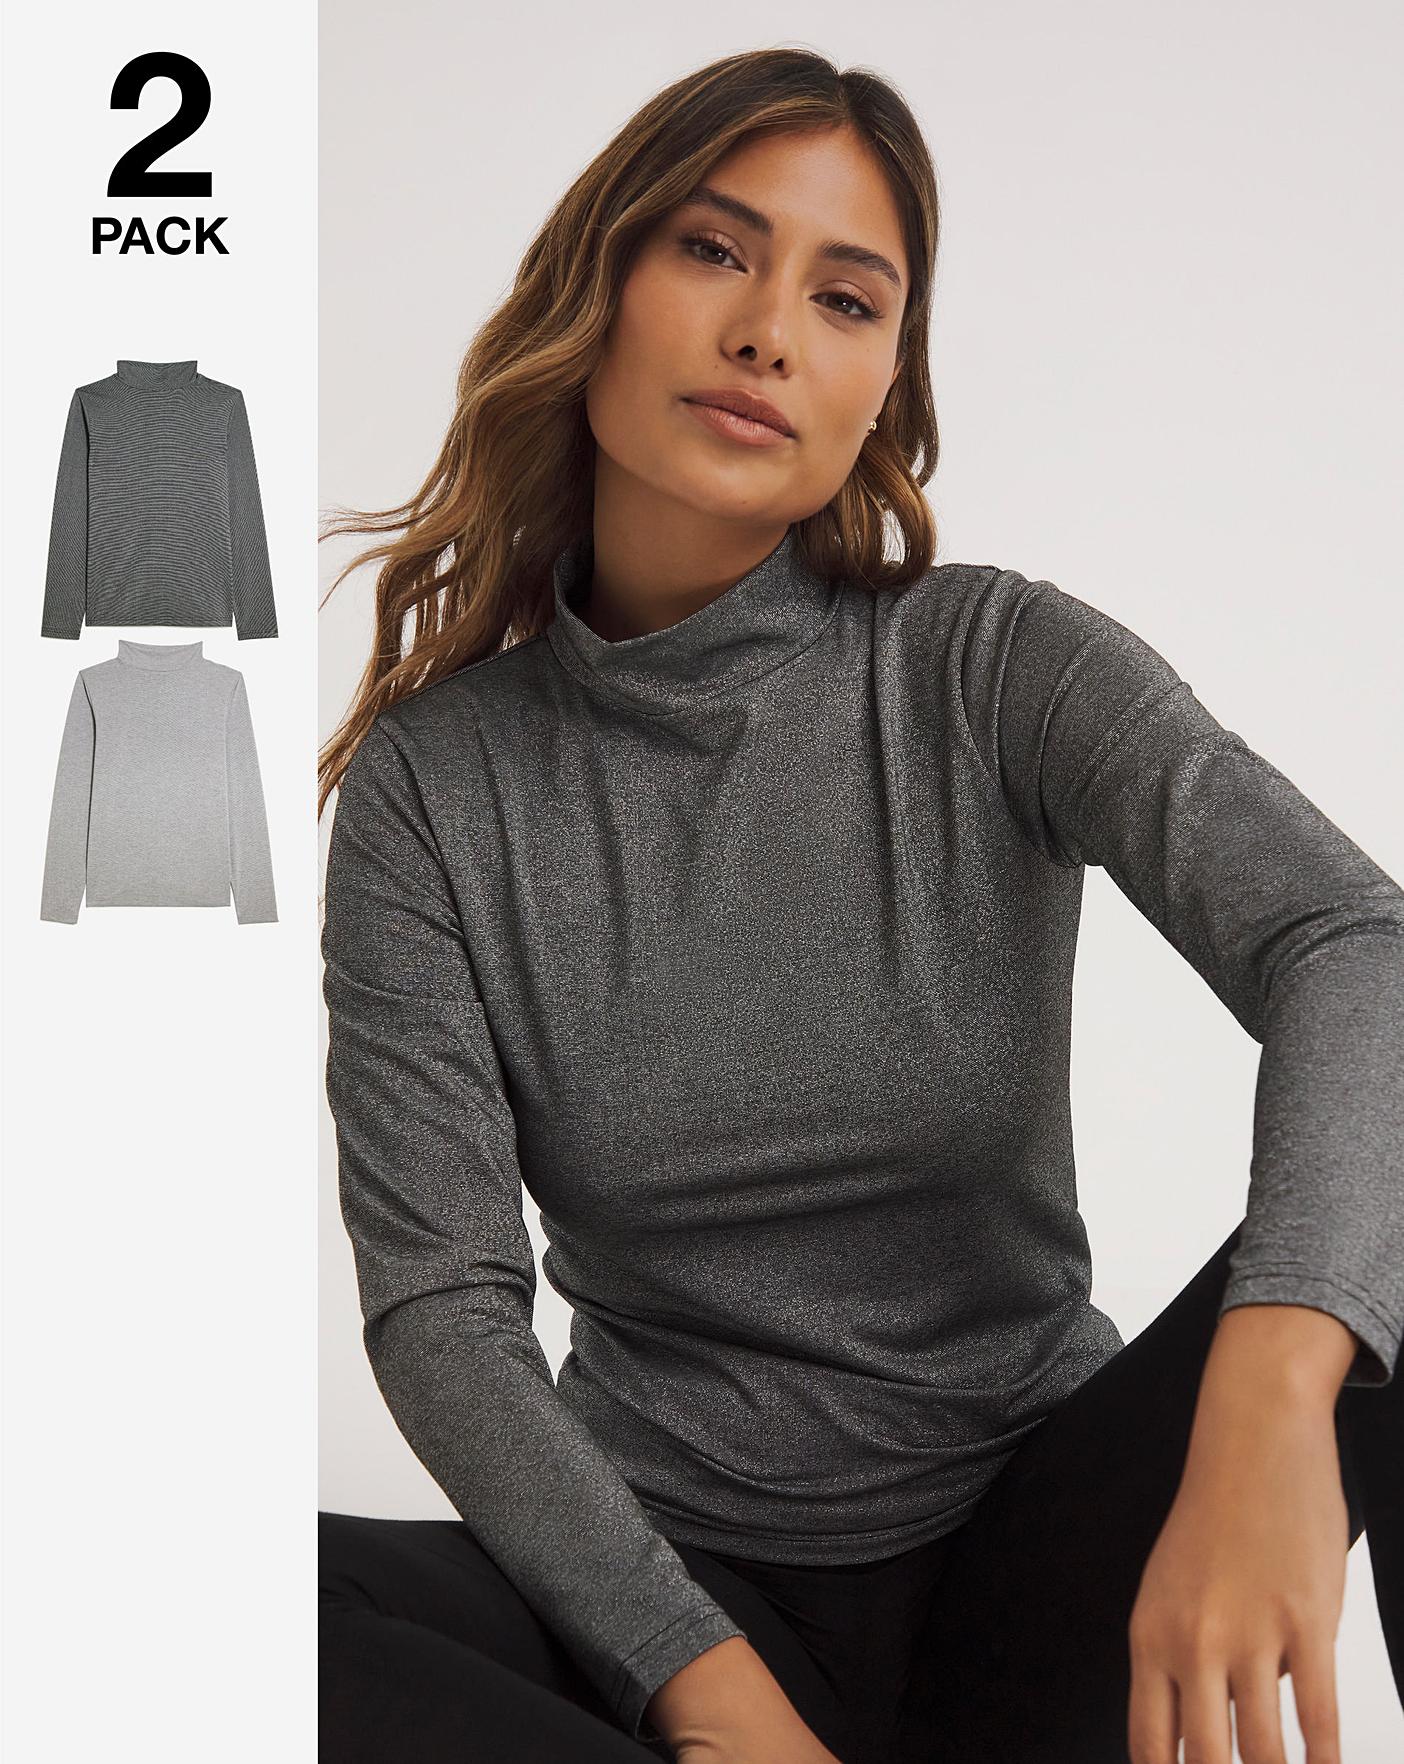 Women's Thermal Shirts (2-Pack)